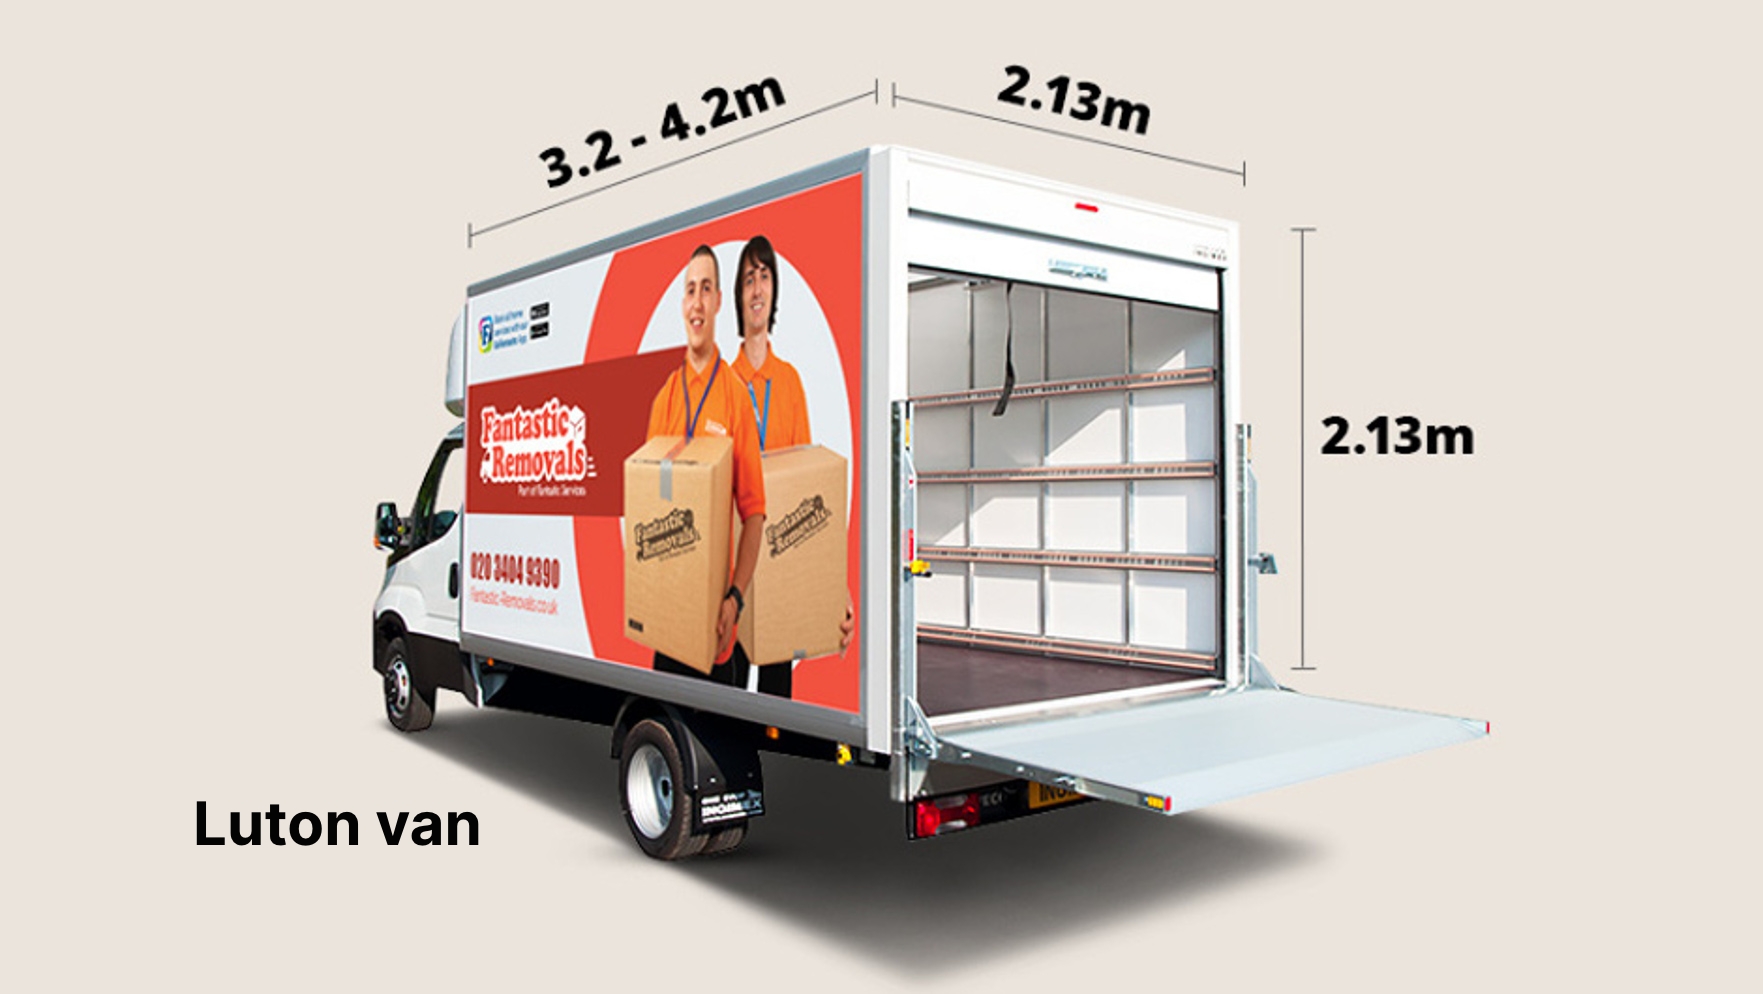 The image shows a photo of a branded Fantastic Services Luton van and its dimensions.